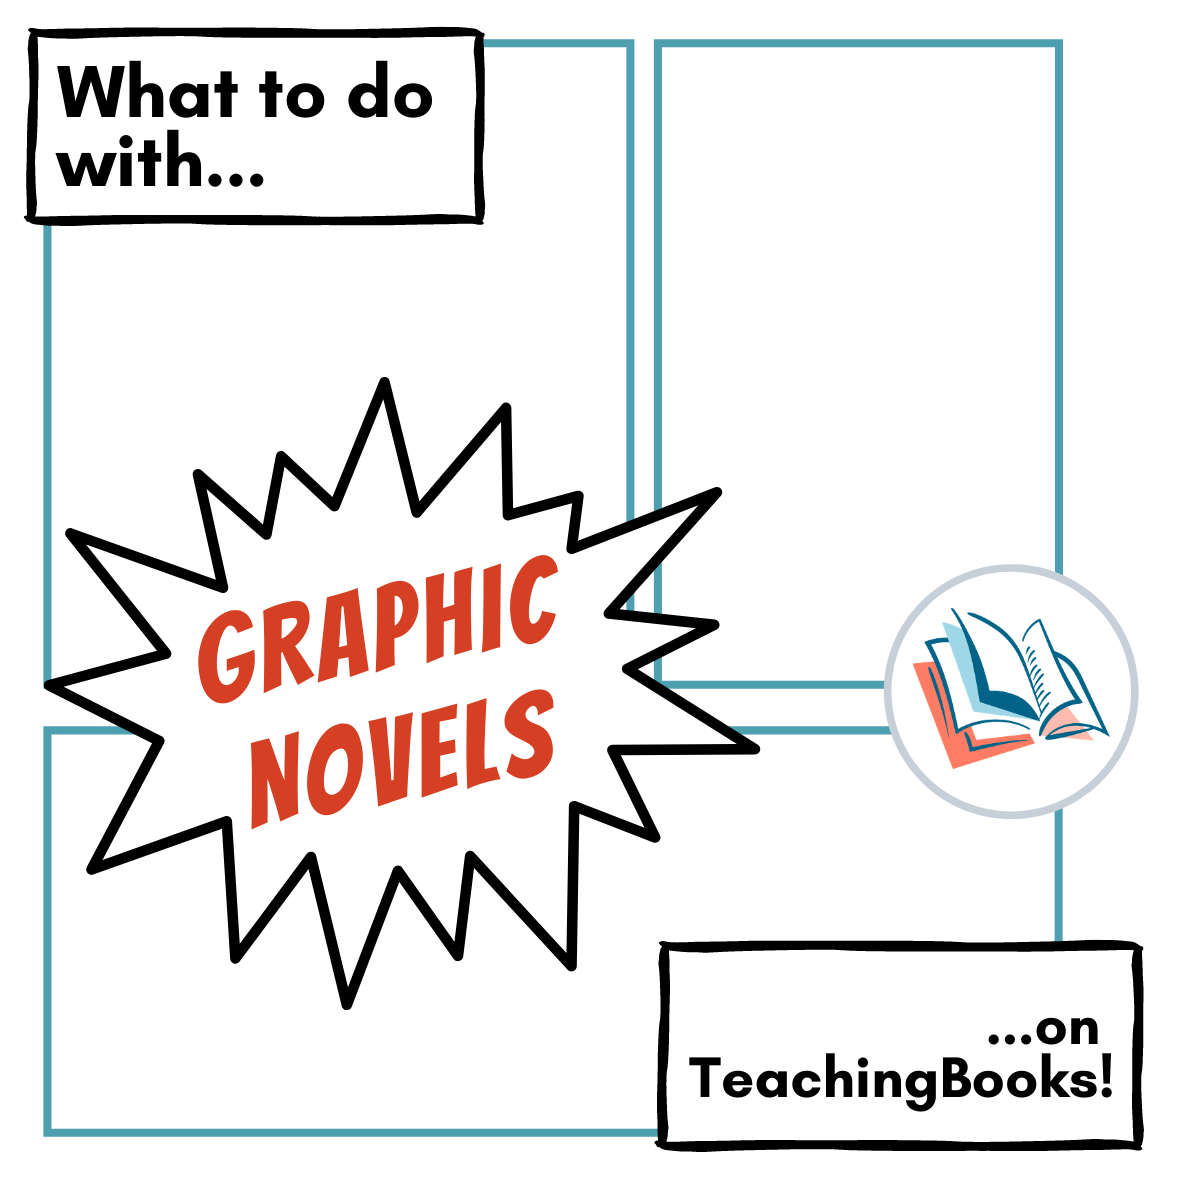 Image with blue graphic novel panels and pop out text that says "What to do with Graphic Novels on TeachingBooks"